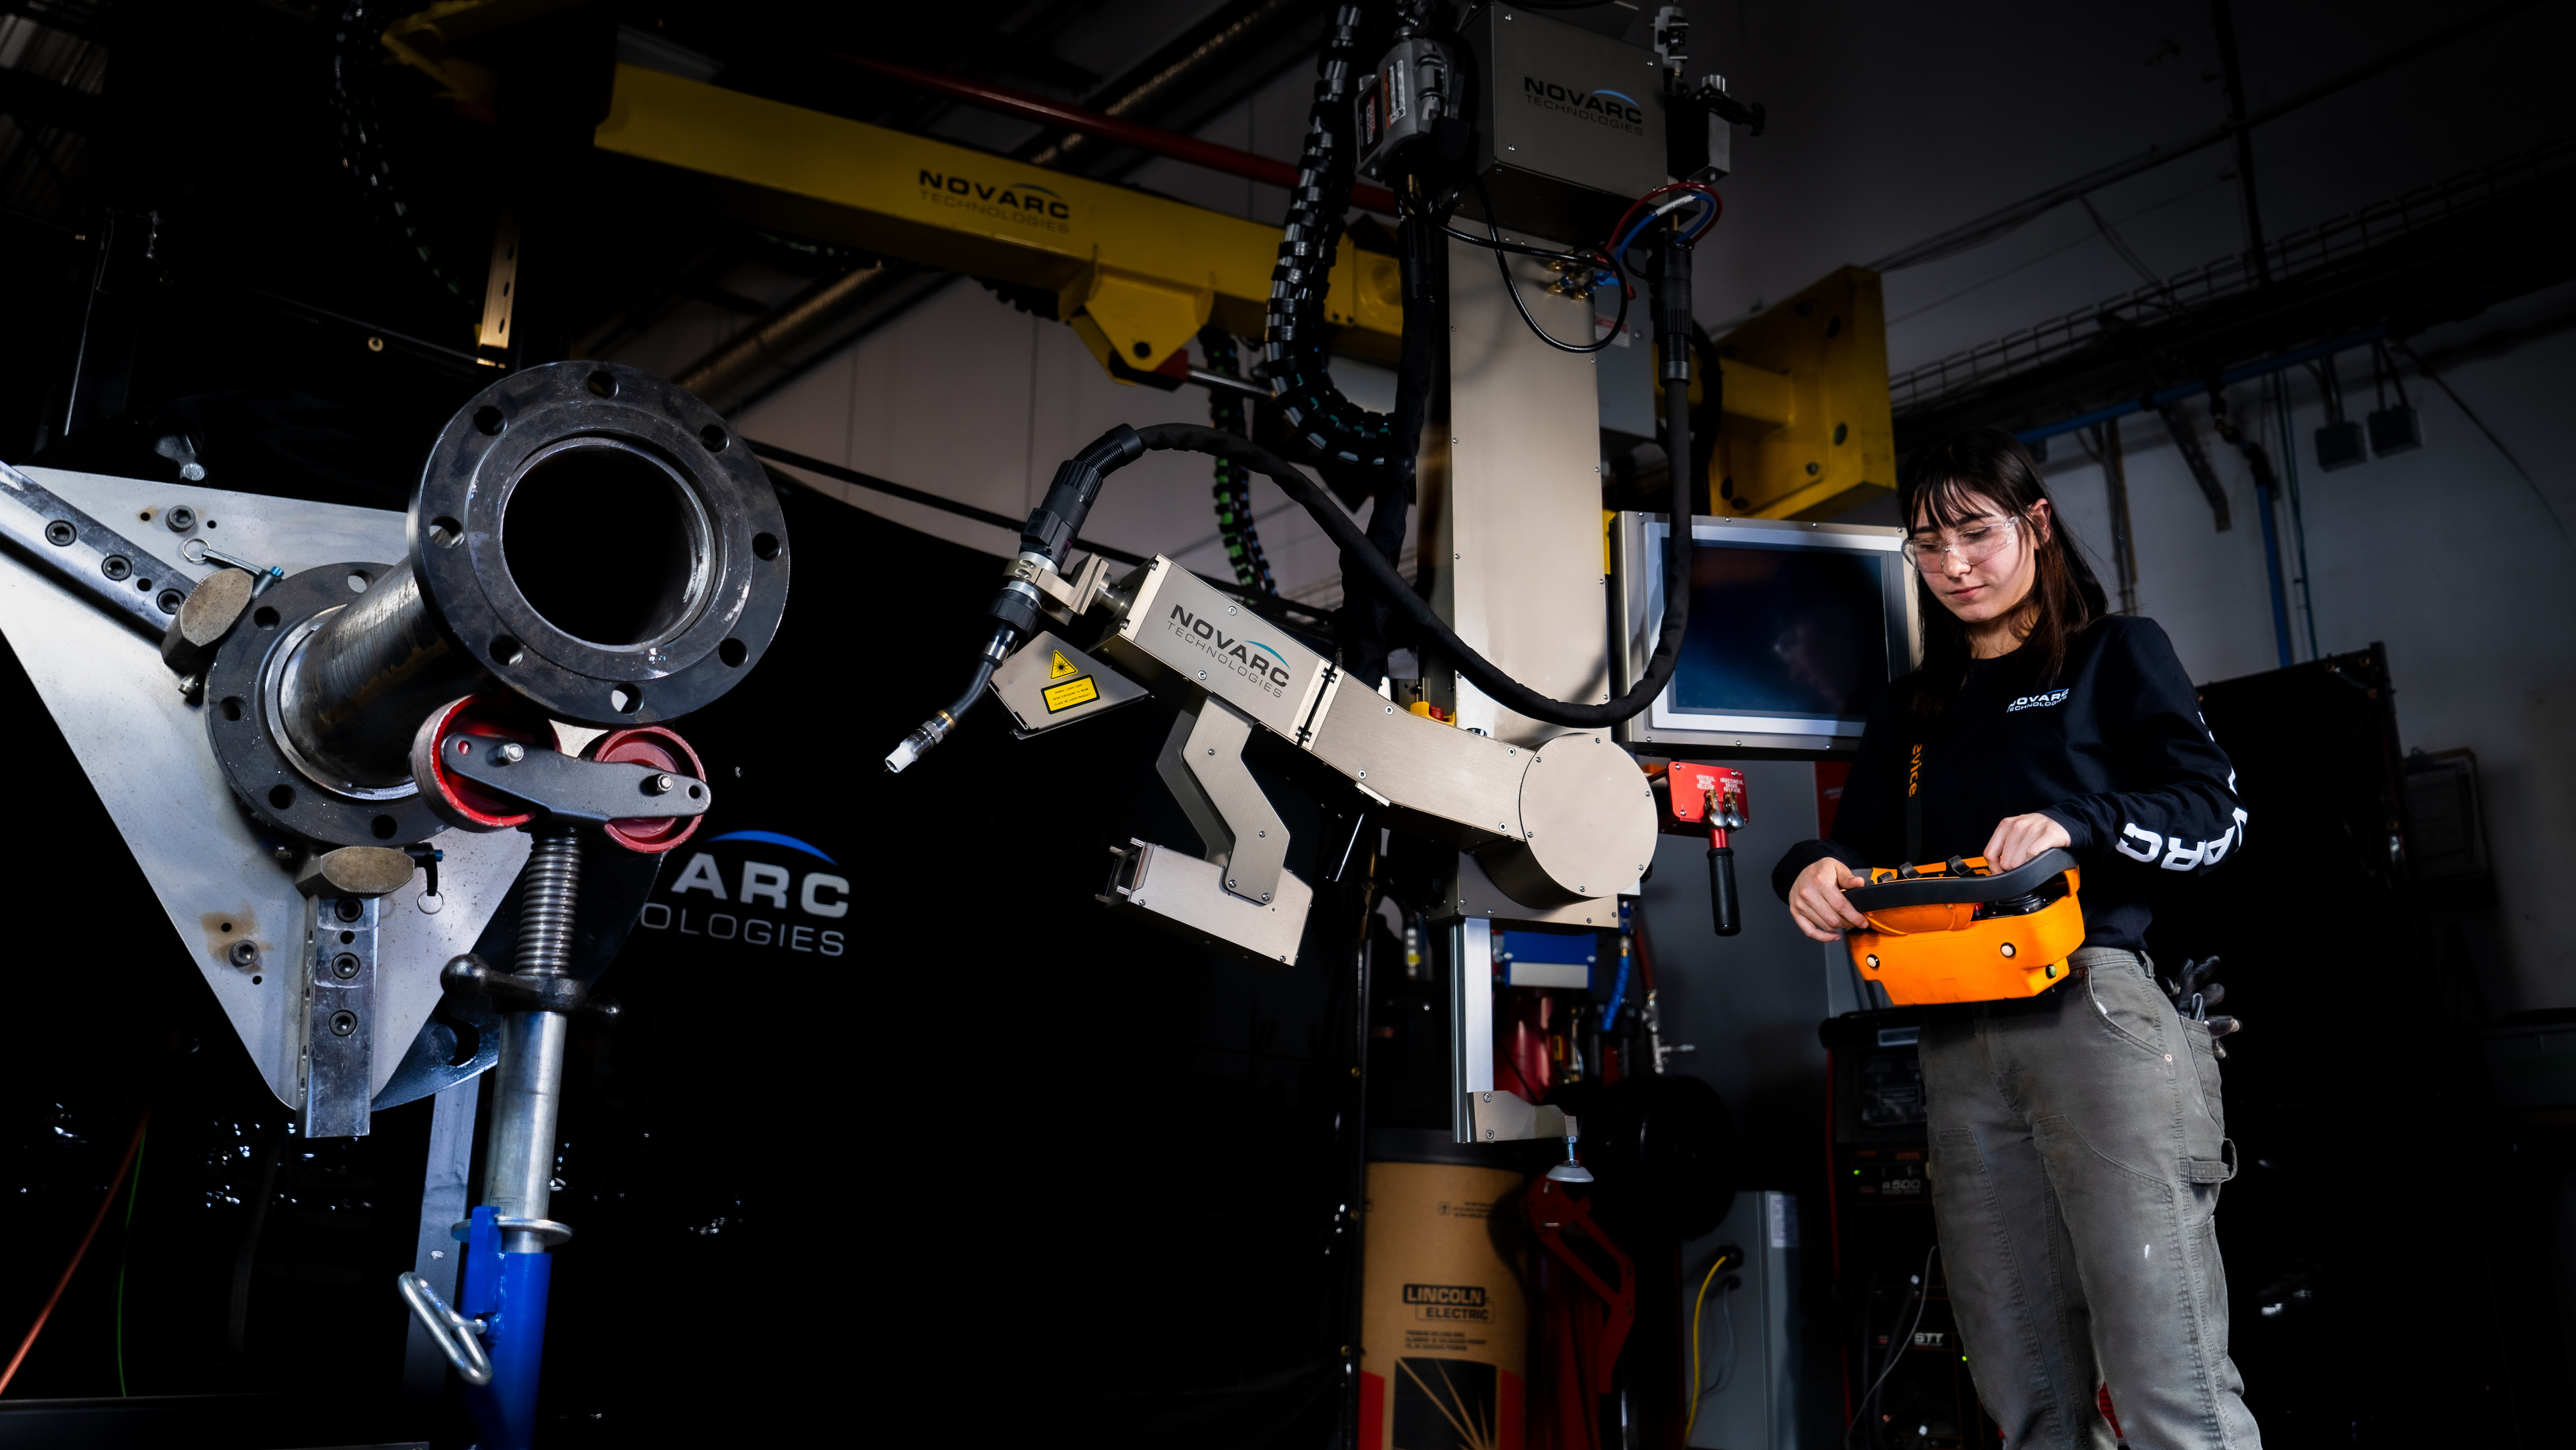 Novarc’s Pipe Spool Welding Robot (SWR™) dramatically boosts productivity and shop capacity, delivers a superior weld quality, and improves welder ergonomics